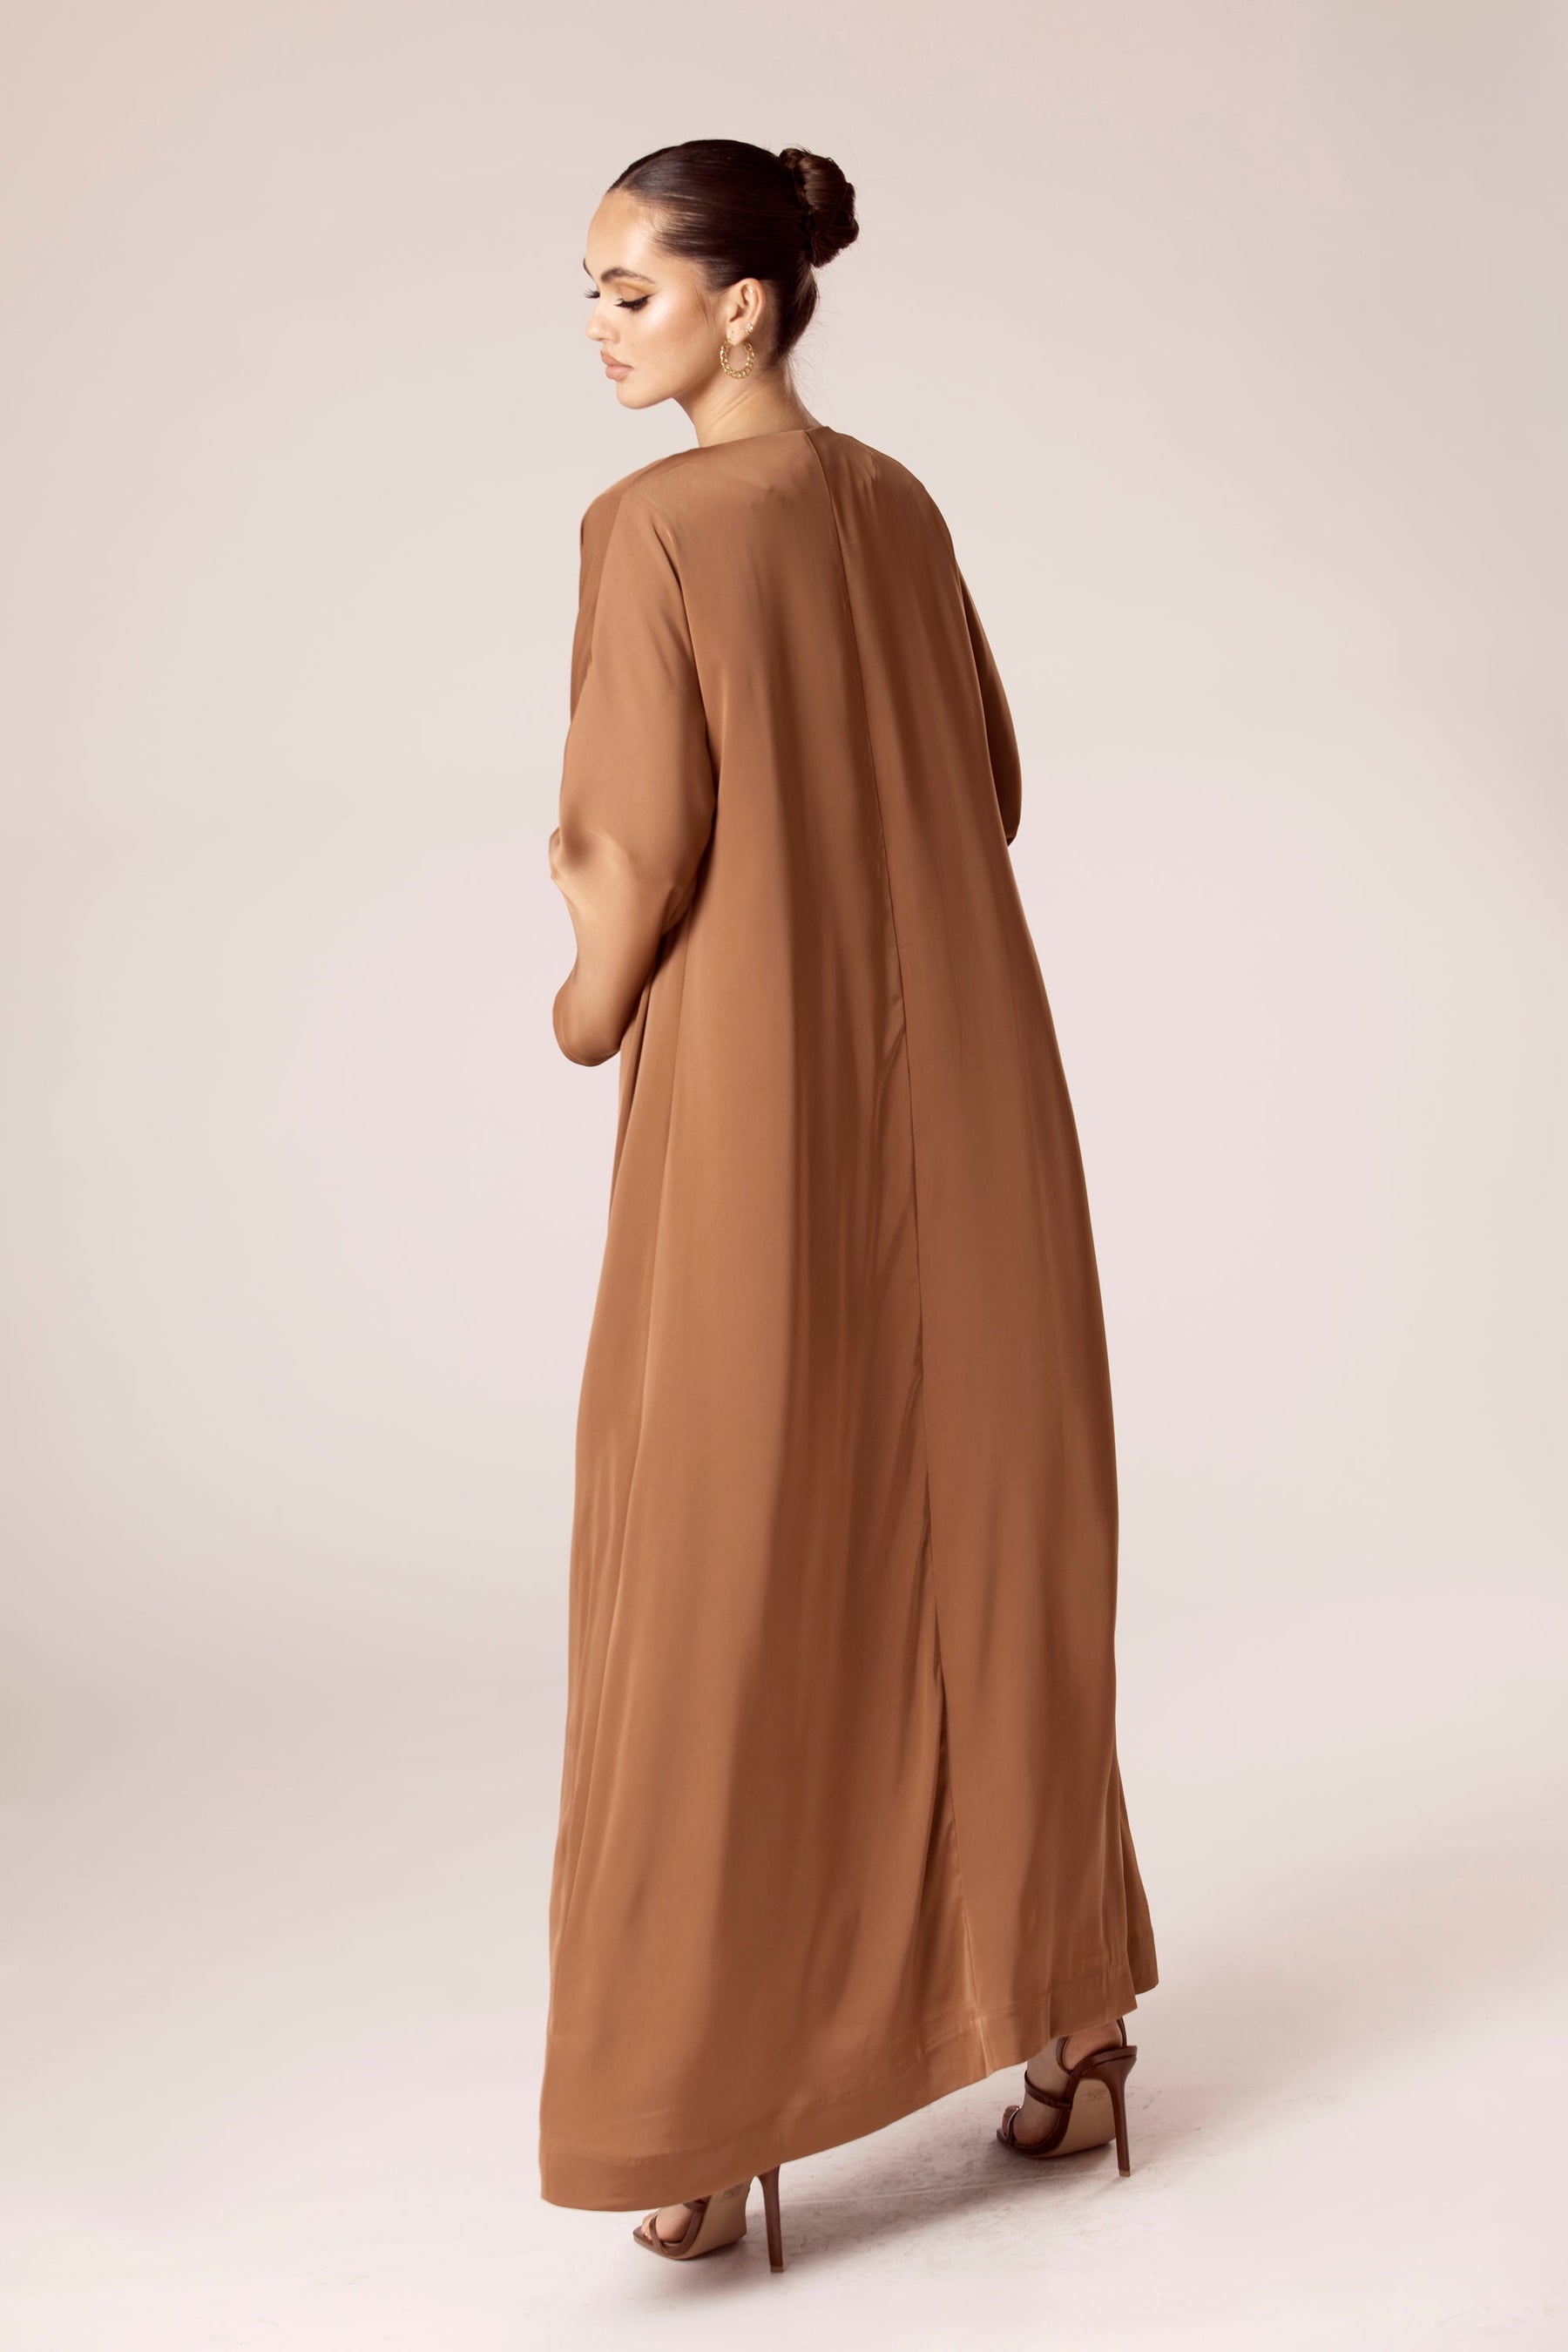 Angelina Open Abaya - Copper Veiled Collection 